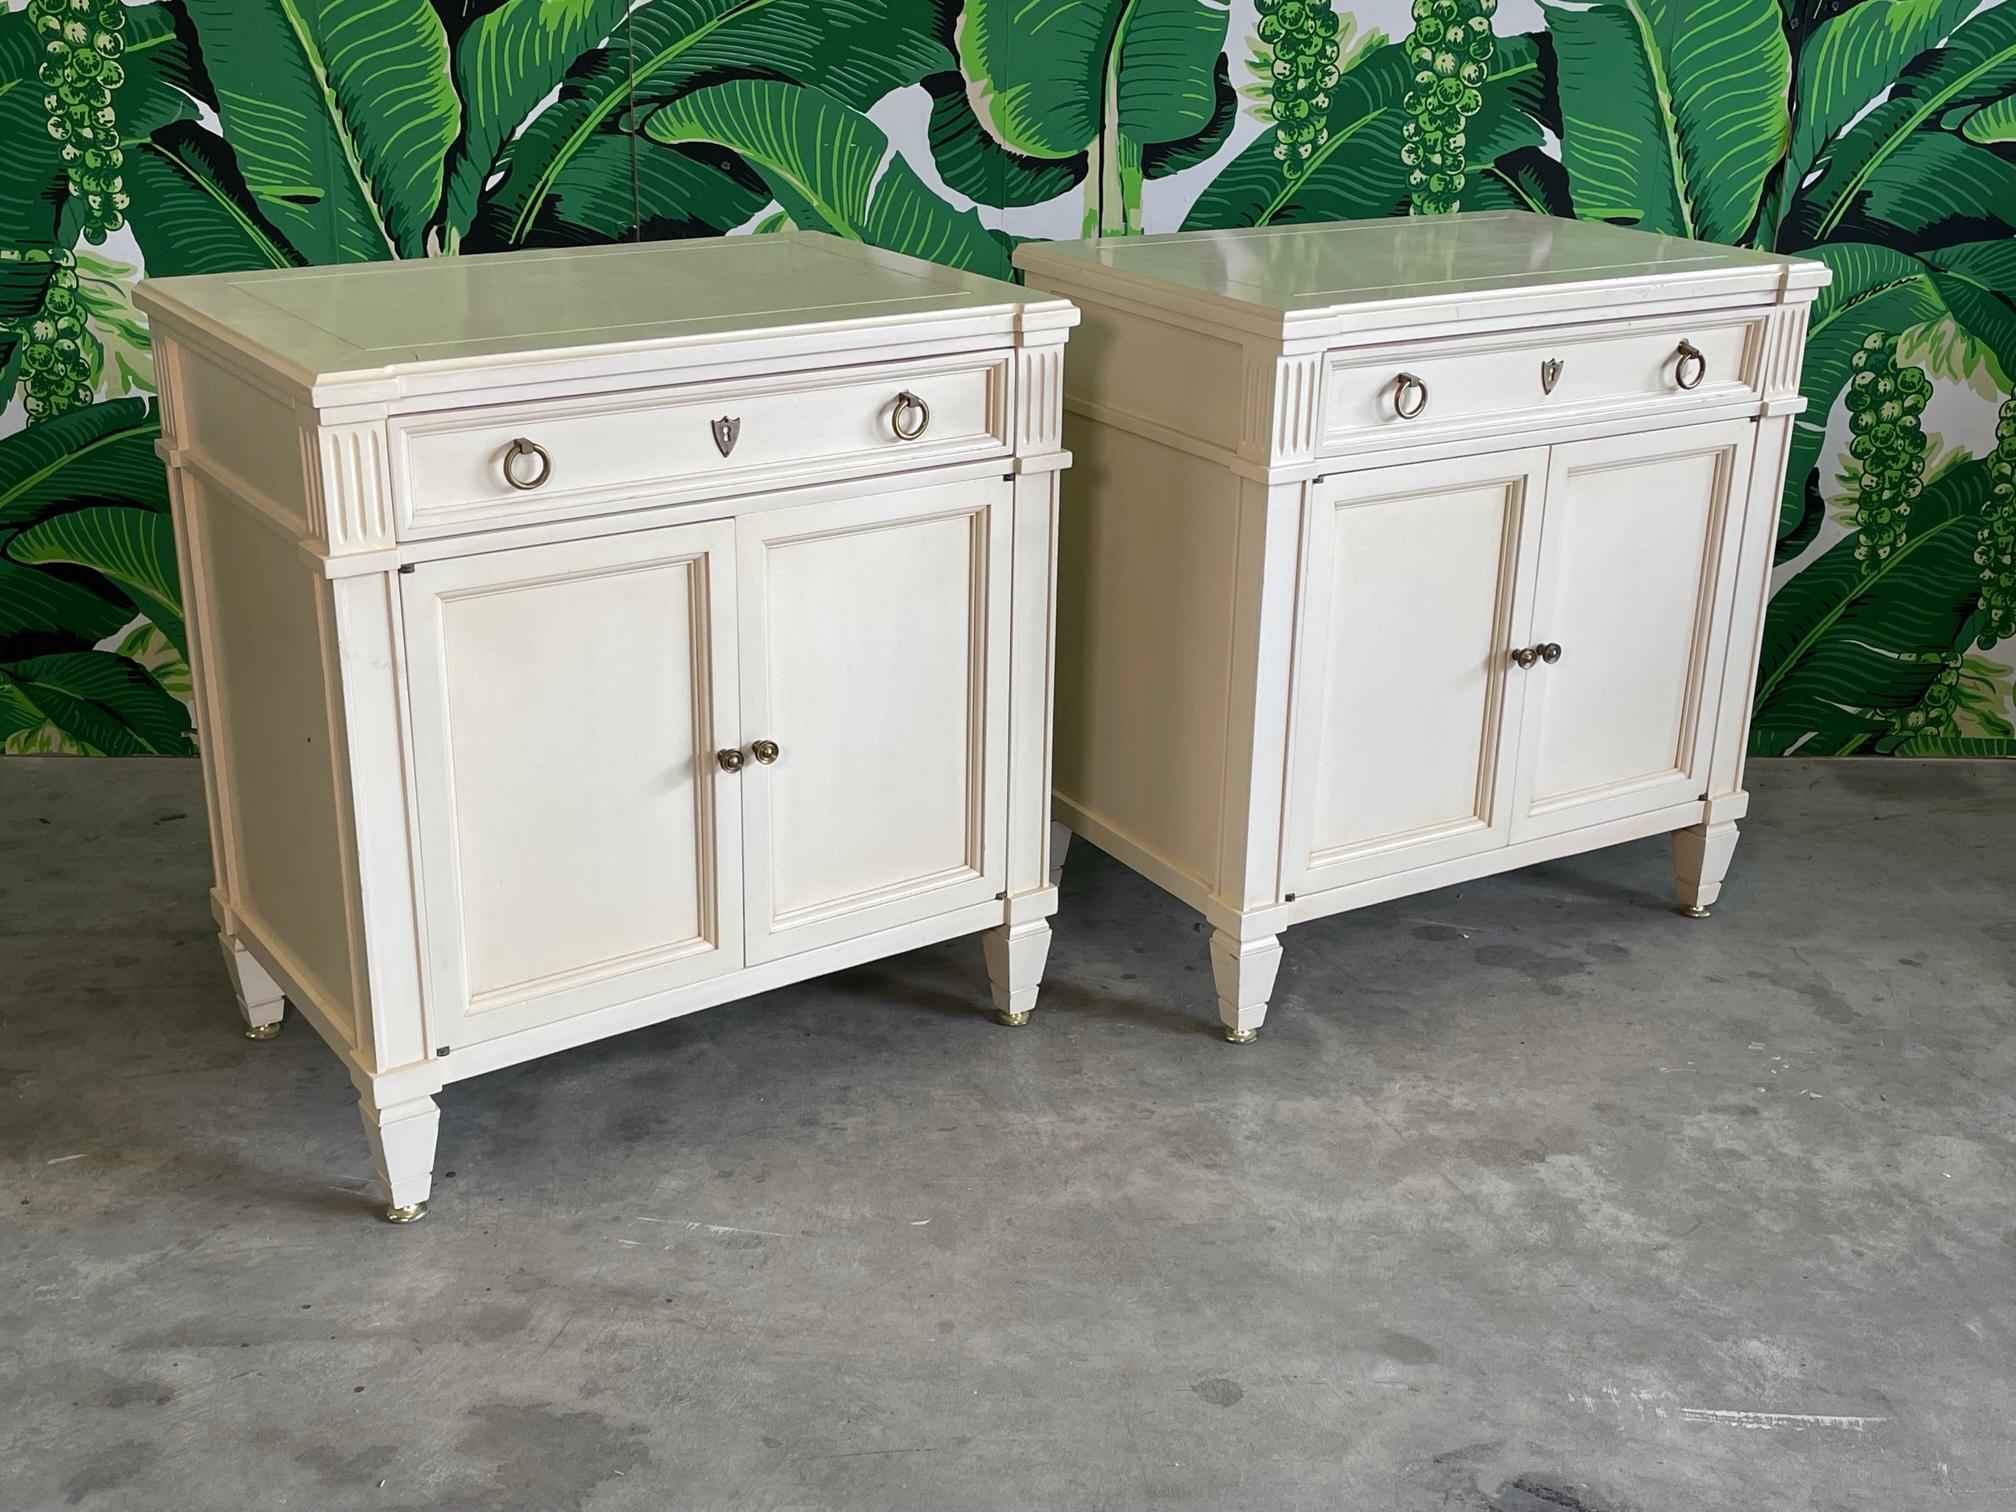 Pair of Neoclassic side tables feature column corners and fluted detailing, Good condition with minor imperfections consistent with age. May exhibit scuffs, marks, or wear, see photos for details.

 